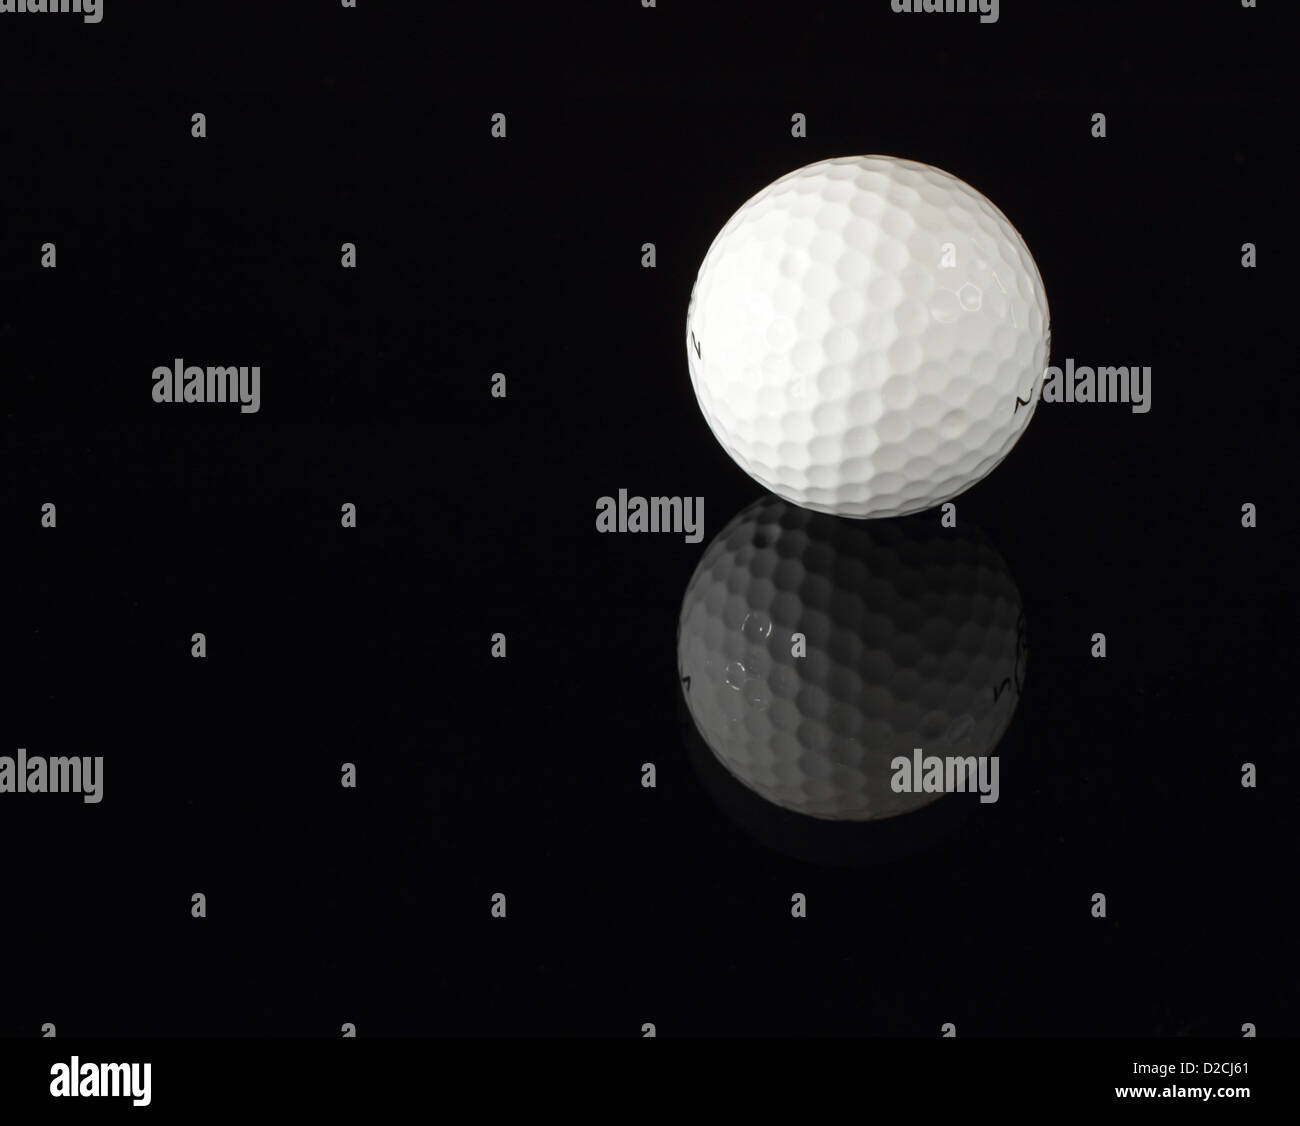 A golf ball reflecting on a black surface. Stock Photo